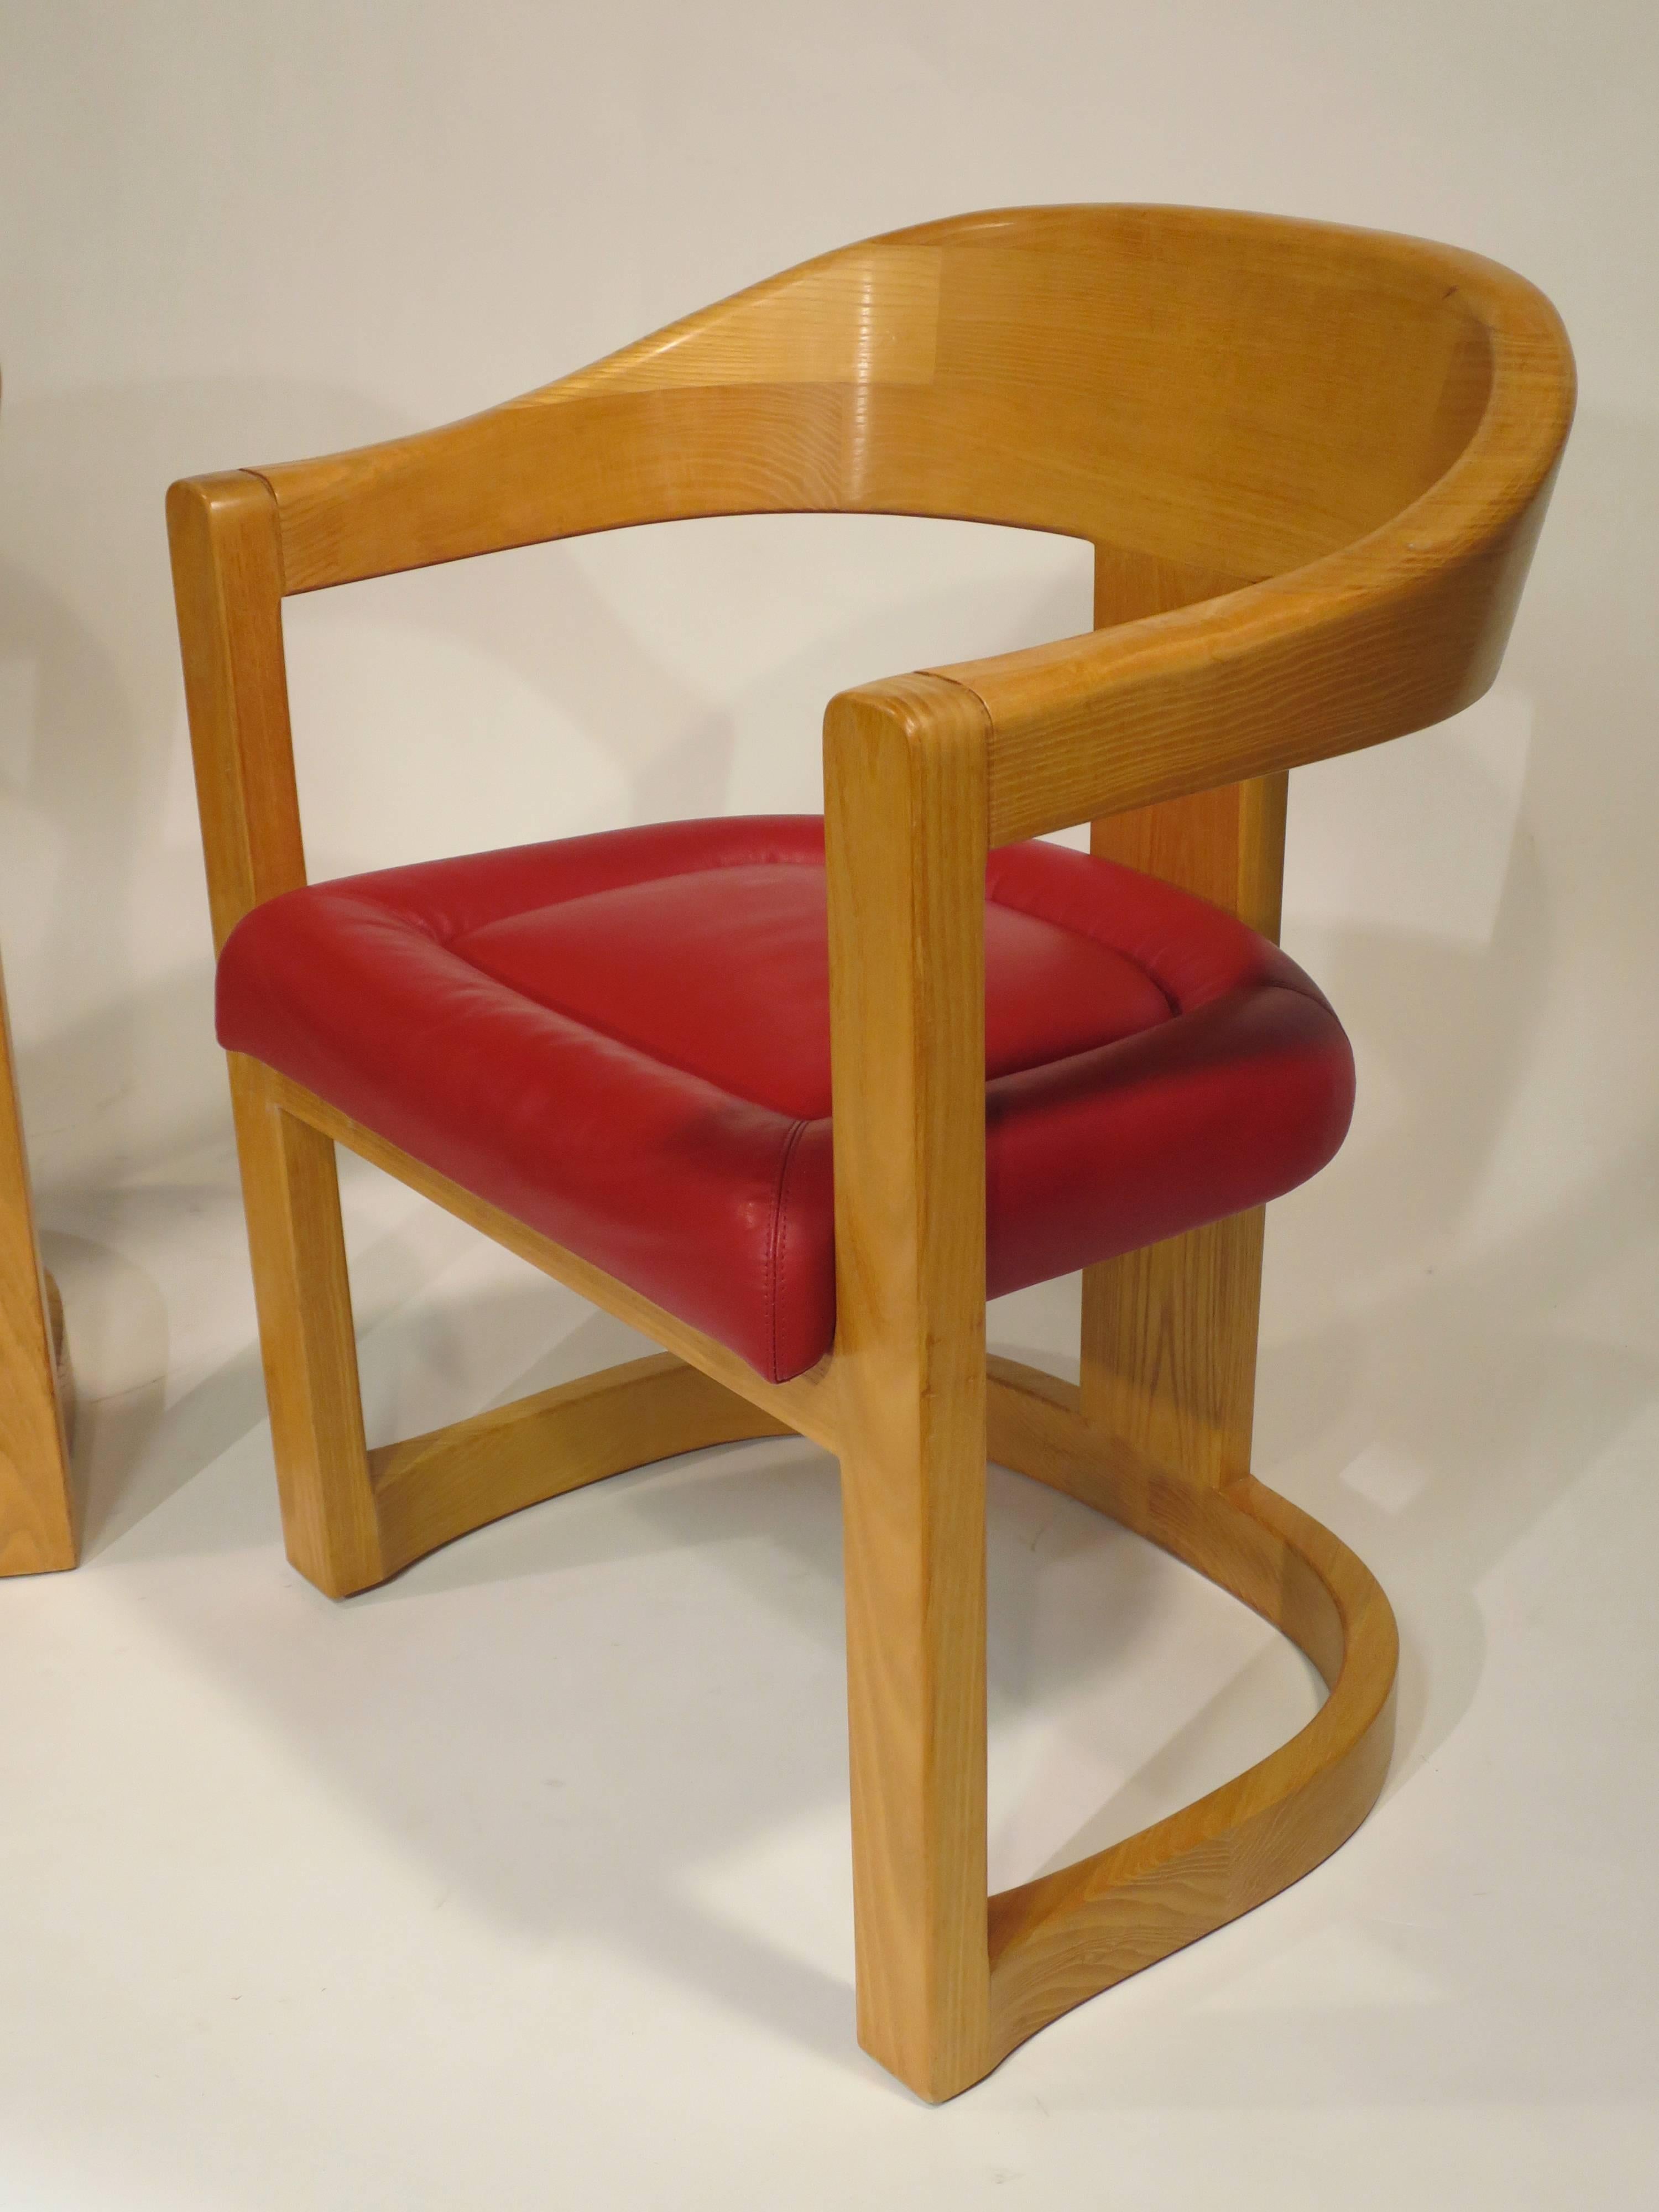 Pair of 'Onassis' chairs by Karl Springer. Solid oak construction with original red leather seats, circa late 1970s.